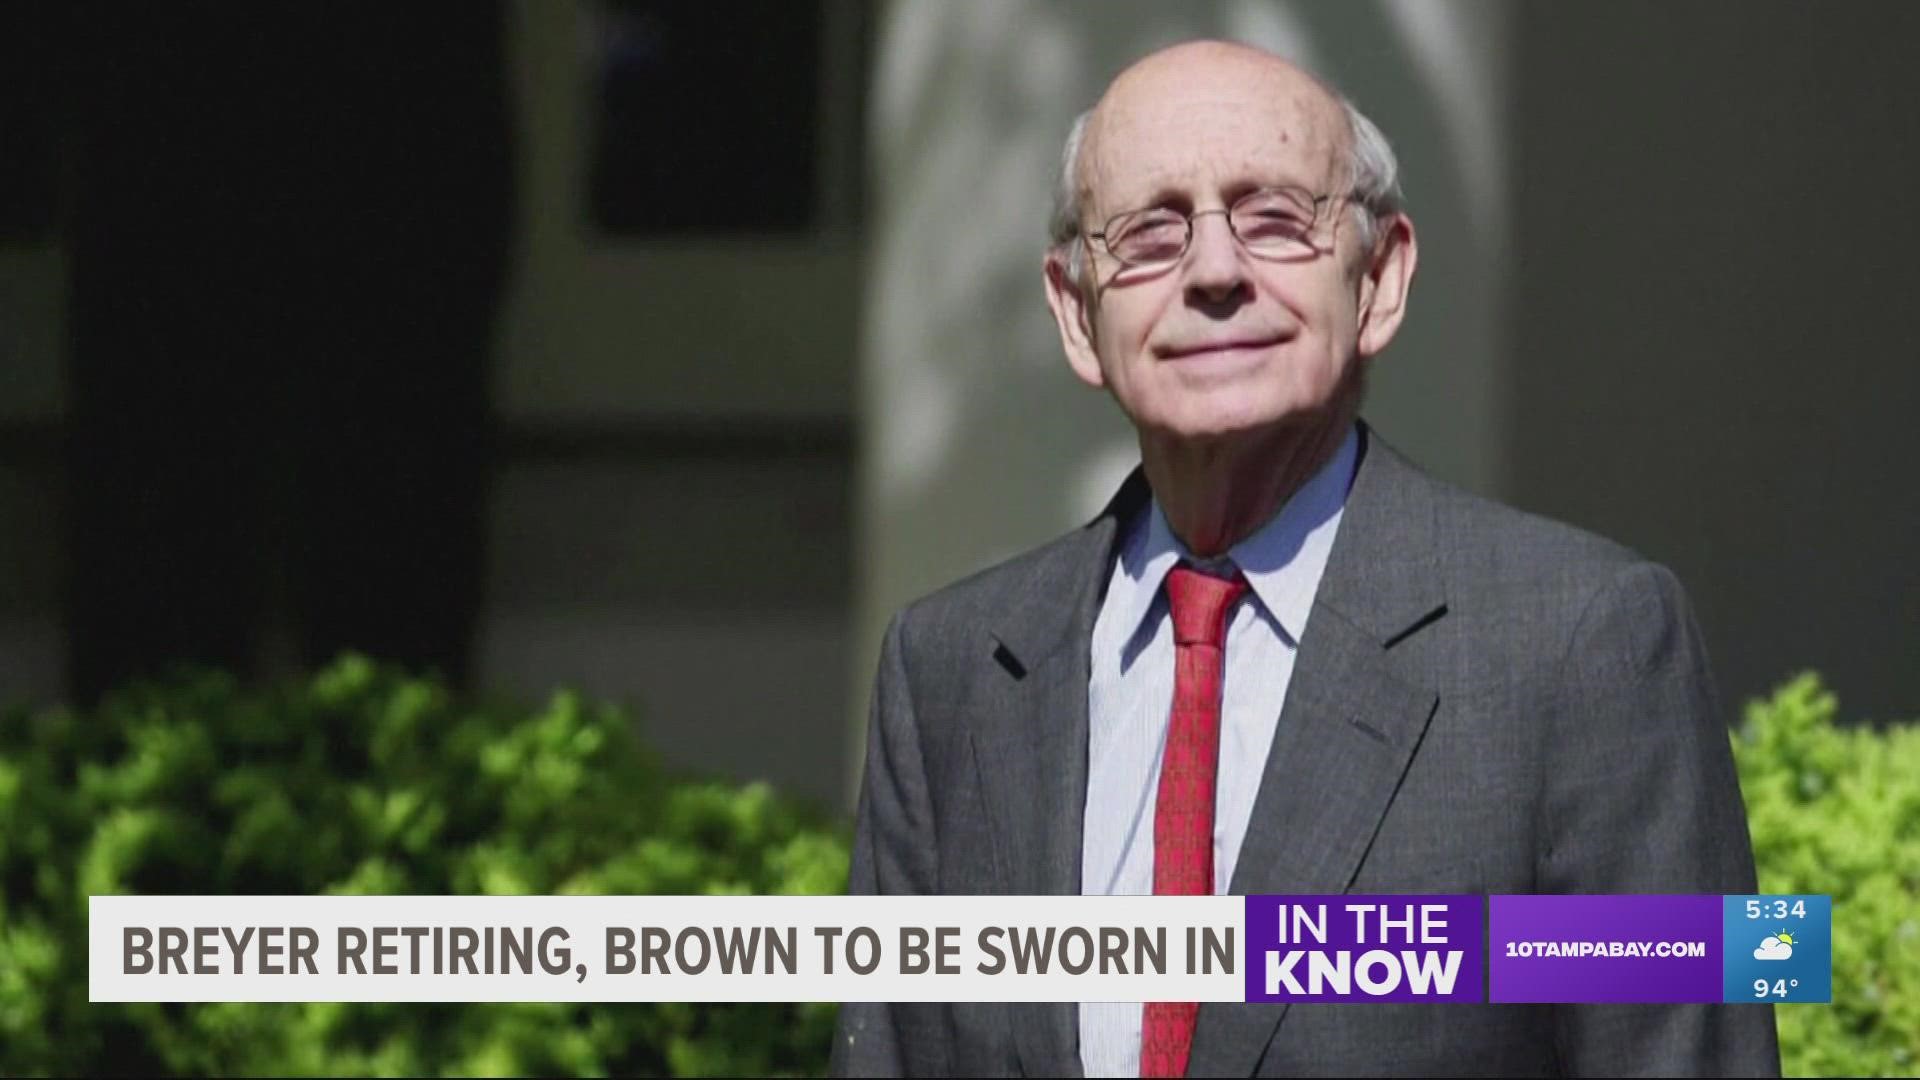 The retirement was expected to come after the term ended, and Breyer's replacement has already been confirmed by the Senate.